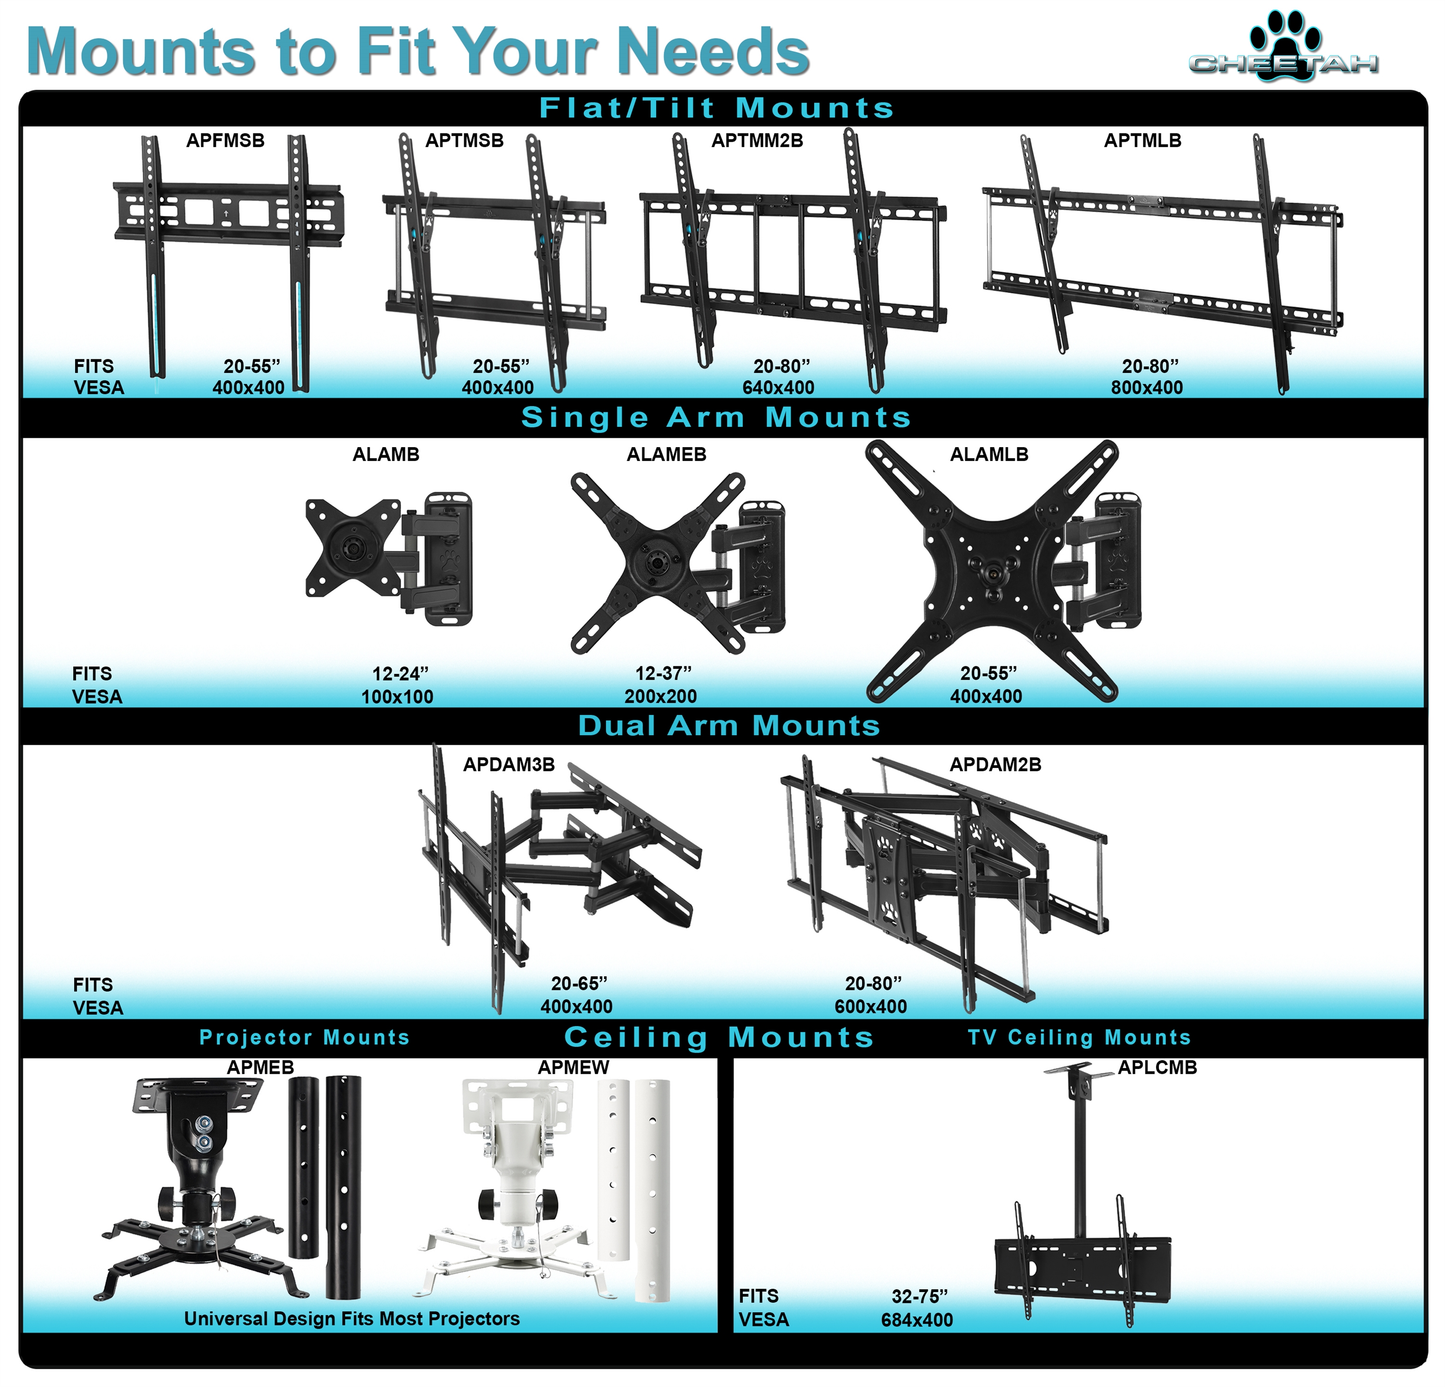 (B-STOCK) Cheetah Mounts Dual Articulating Arm TV Wall Mount Bracket for 20-65” TVs up to VESA 400 and 115lbs